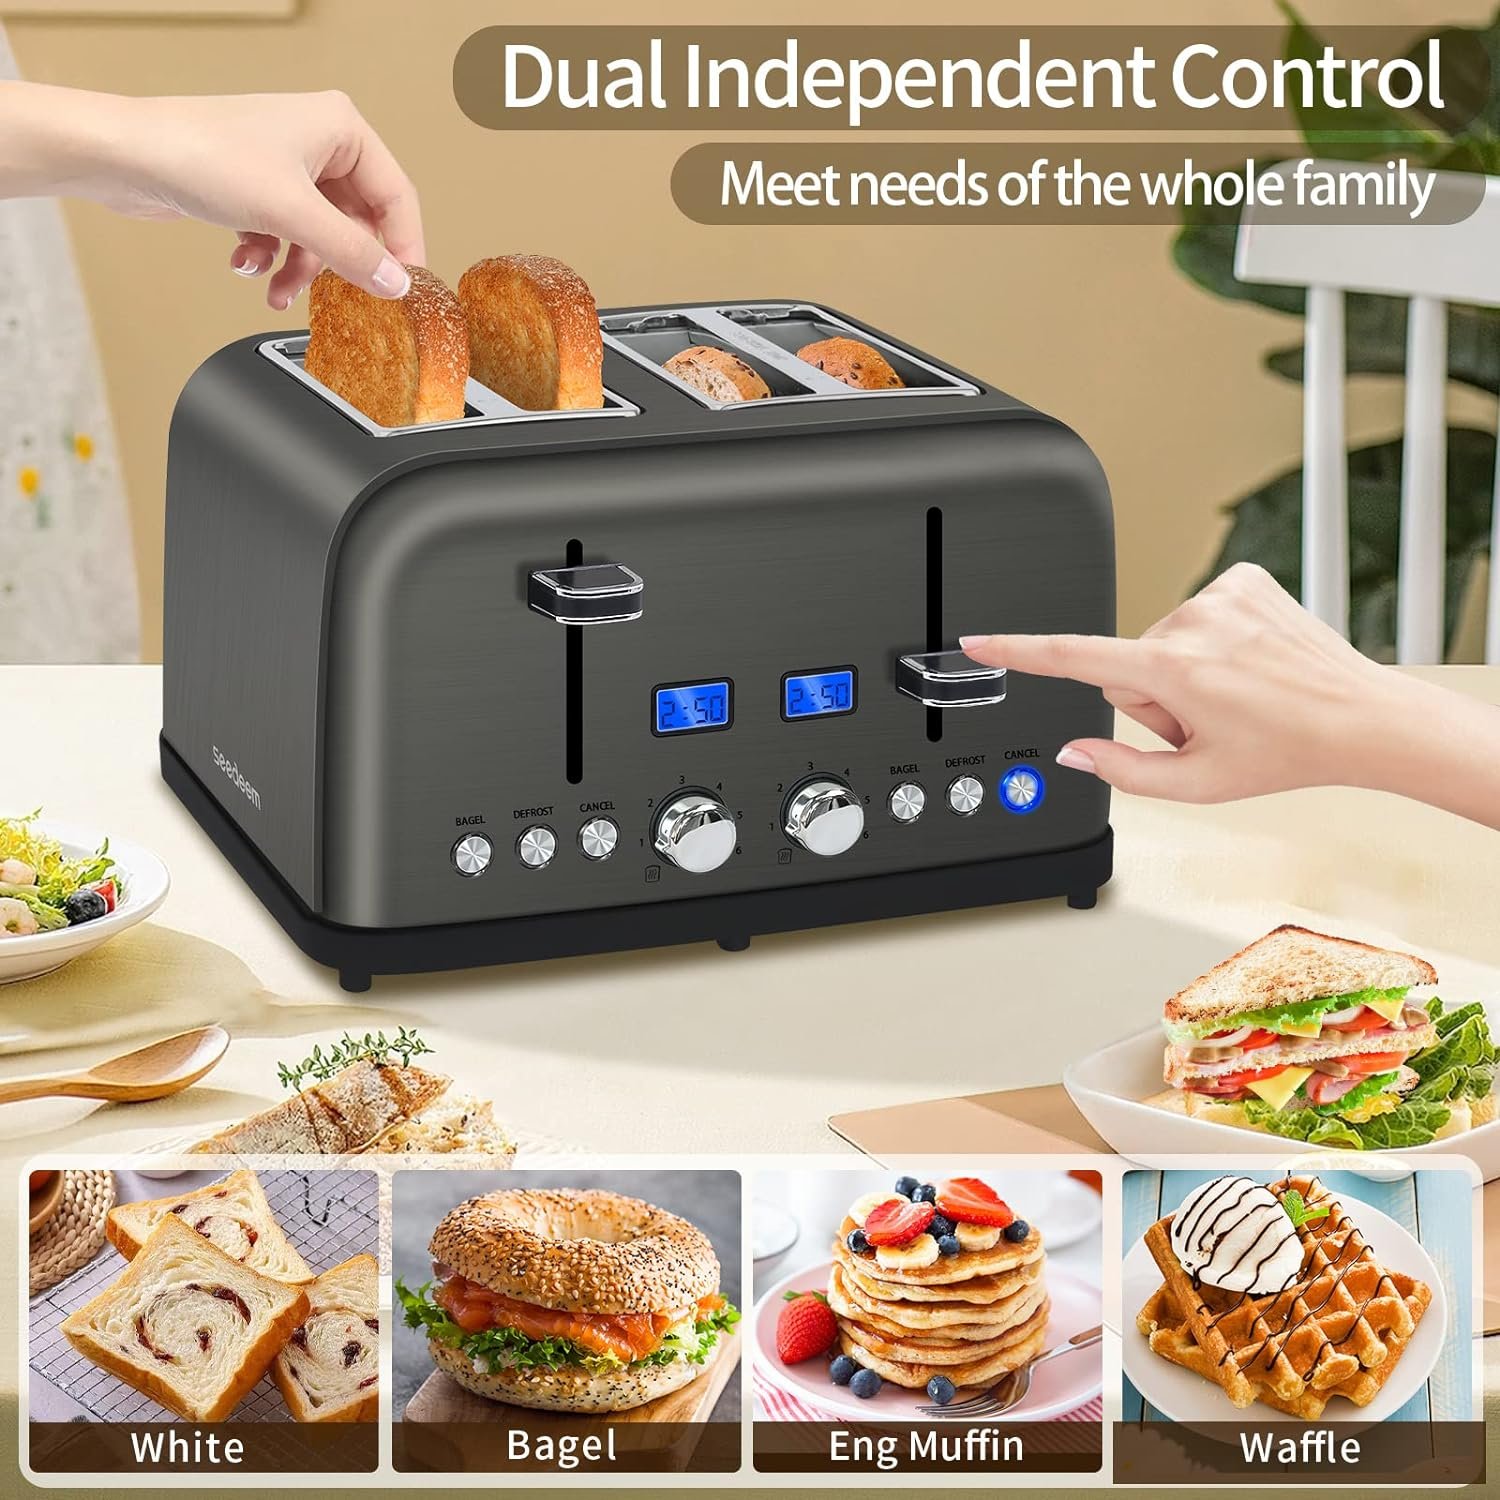 SEEDEEM Toaster 4 Slice, LCD Display, 6 Shade Settings Stainless Toaster, 1.5 Wide Slots, Digital Toaster for Bagel, Defrost, Reheat, Dual Control, Removable Crumb Tray, 1500W, Dark Metallic